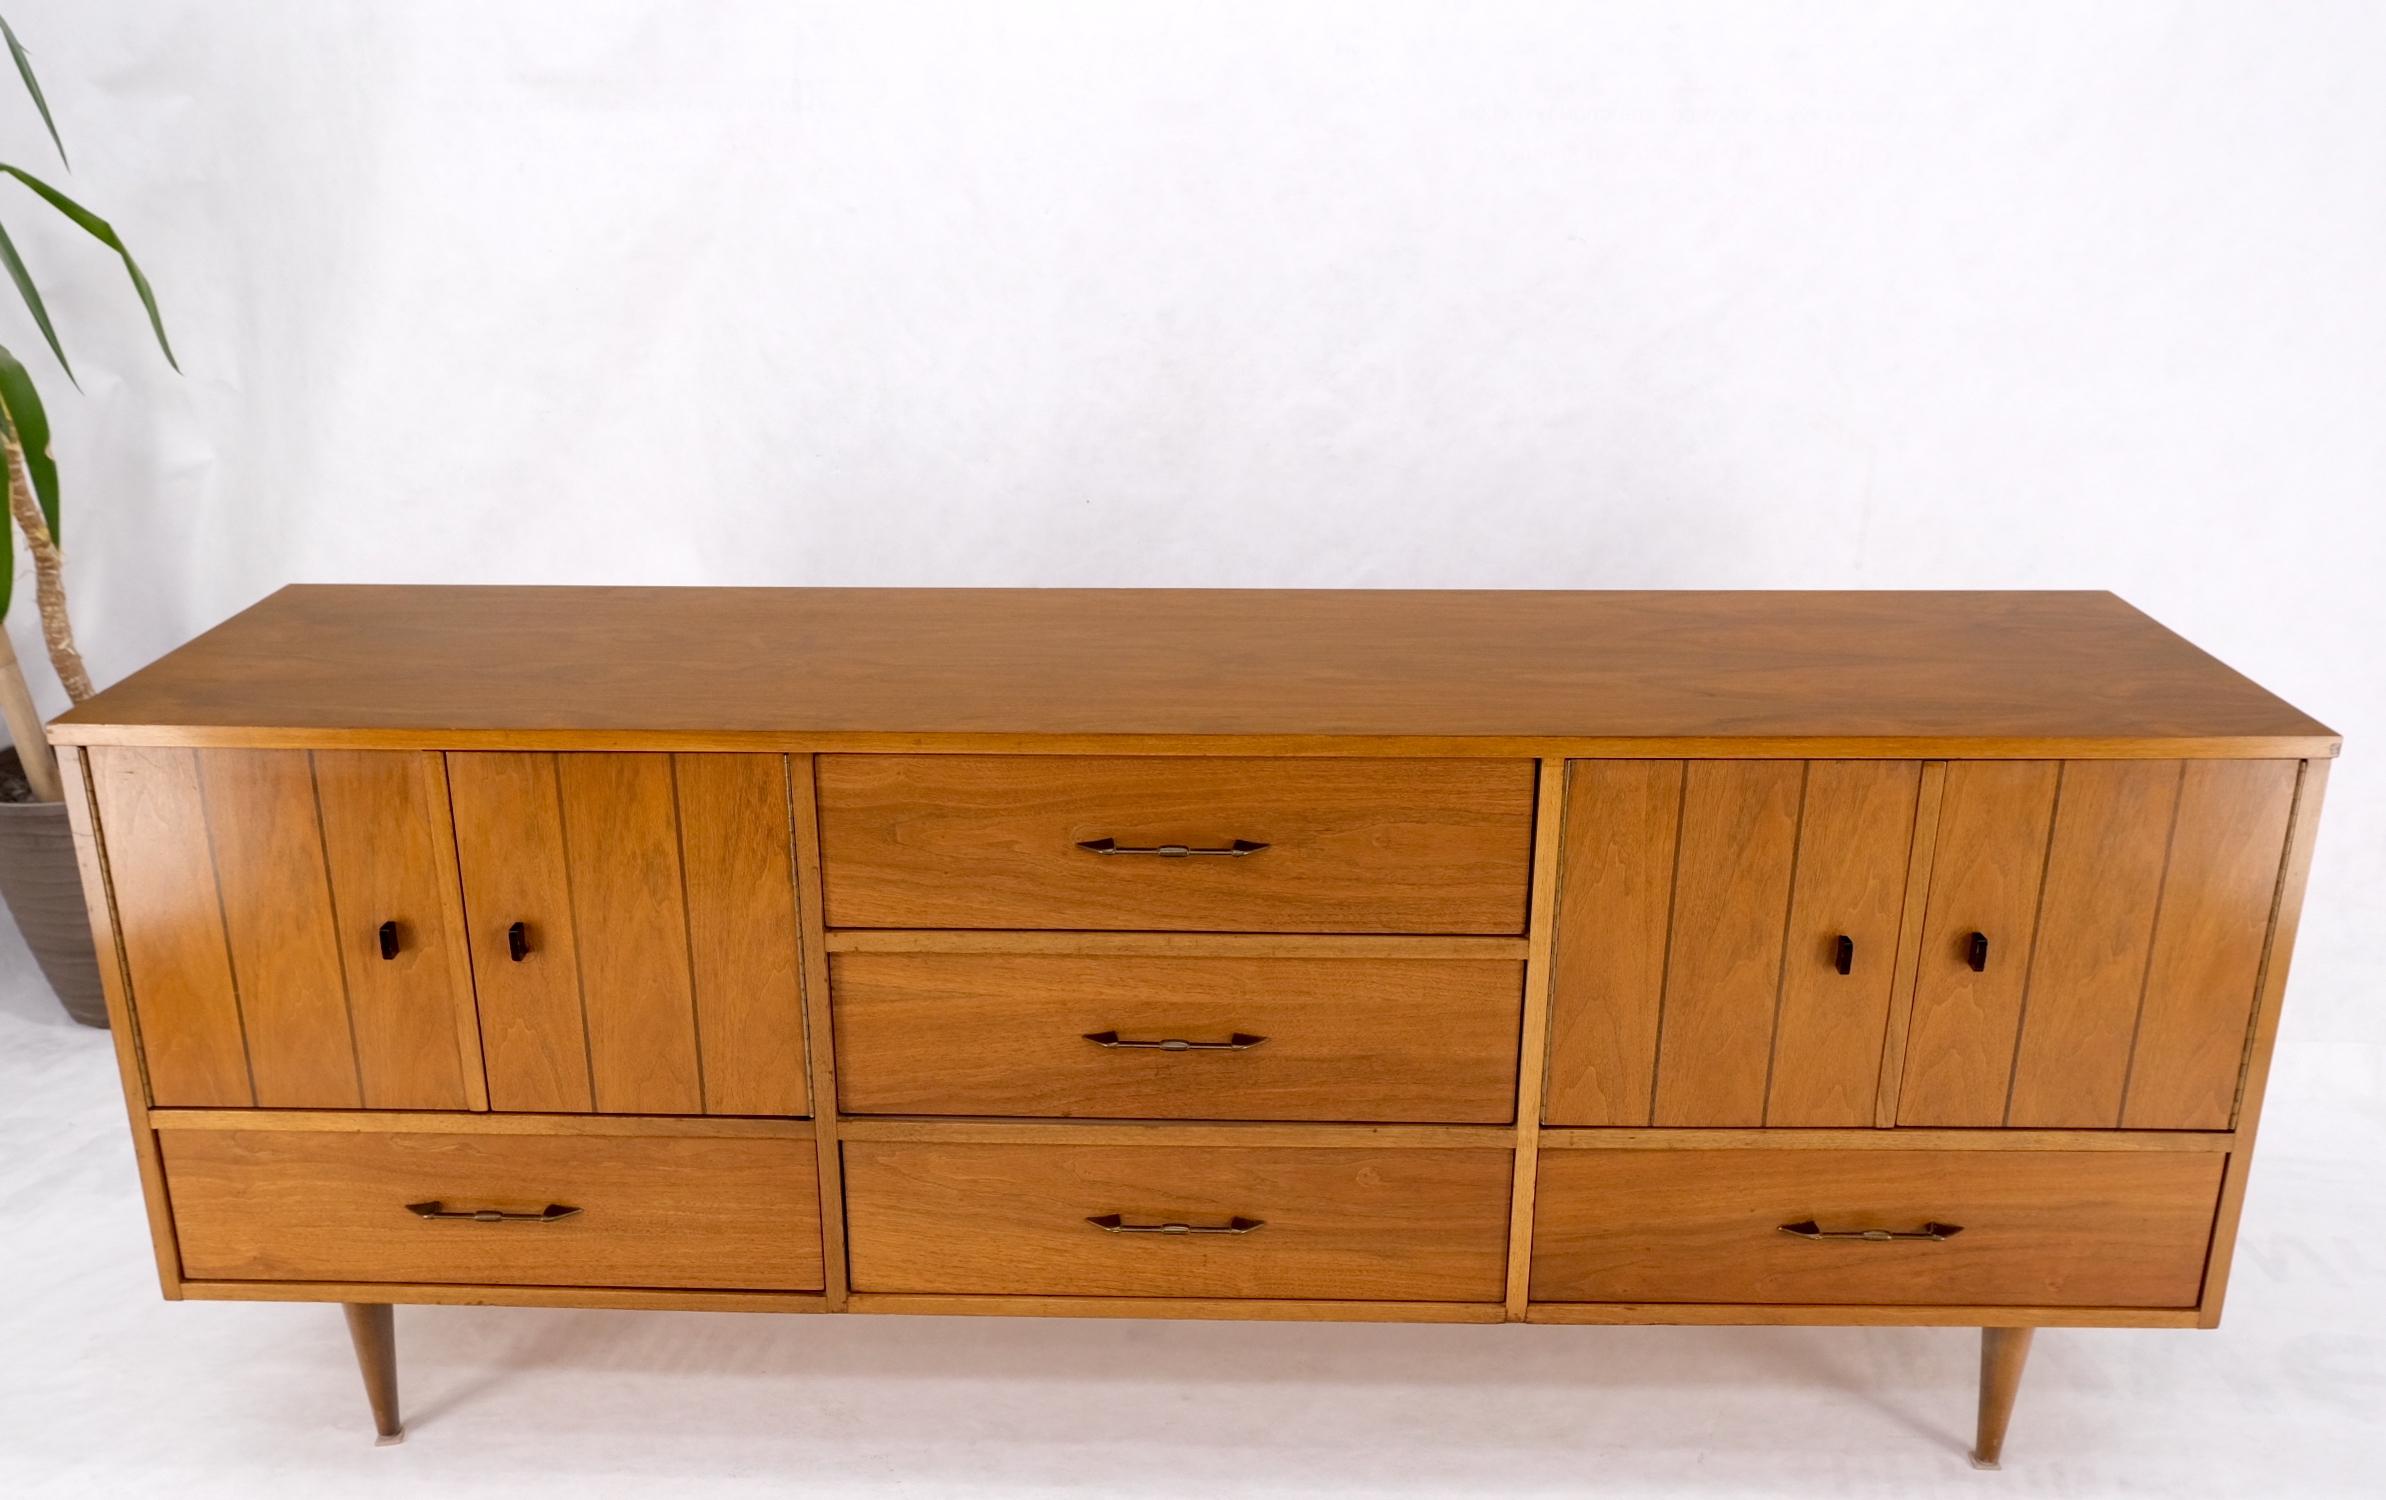 5 Drawers Two Door Compartments Long Walnut Credenza Dresser Dowel Legs Mint! For Sale 9